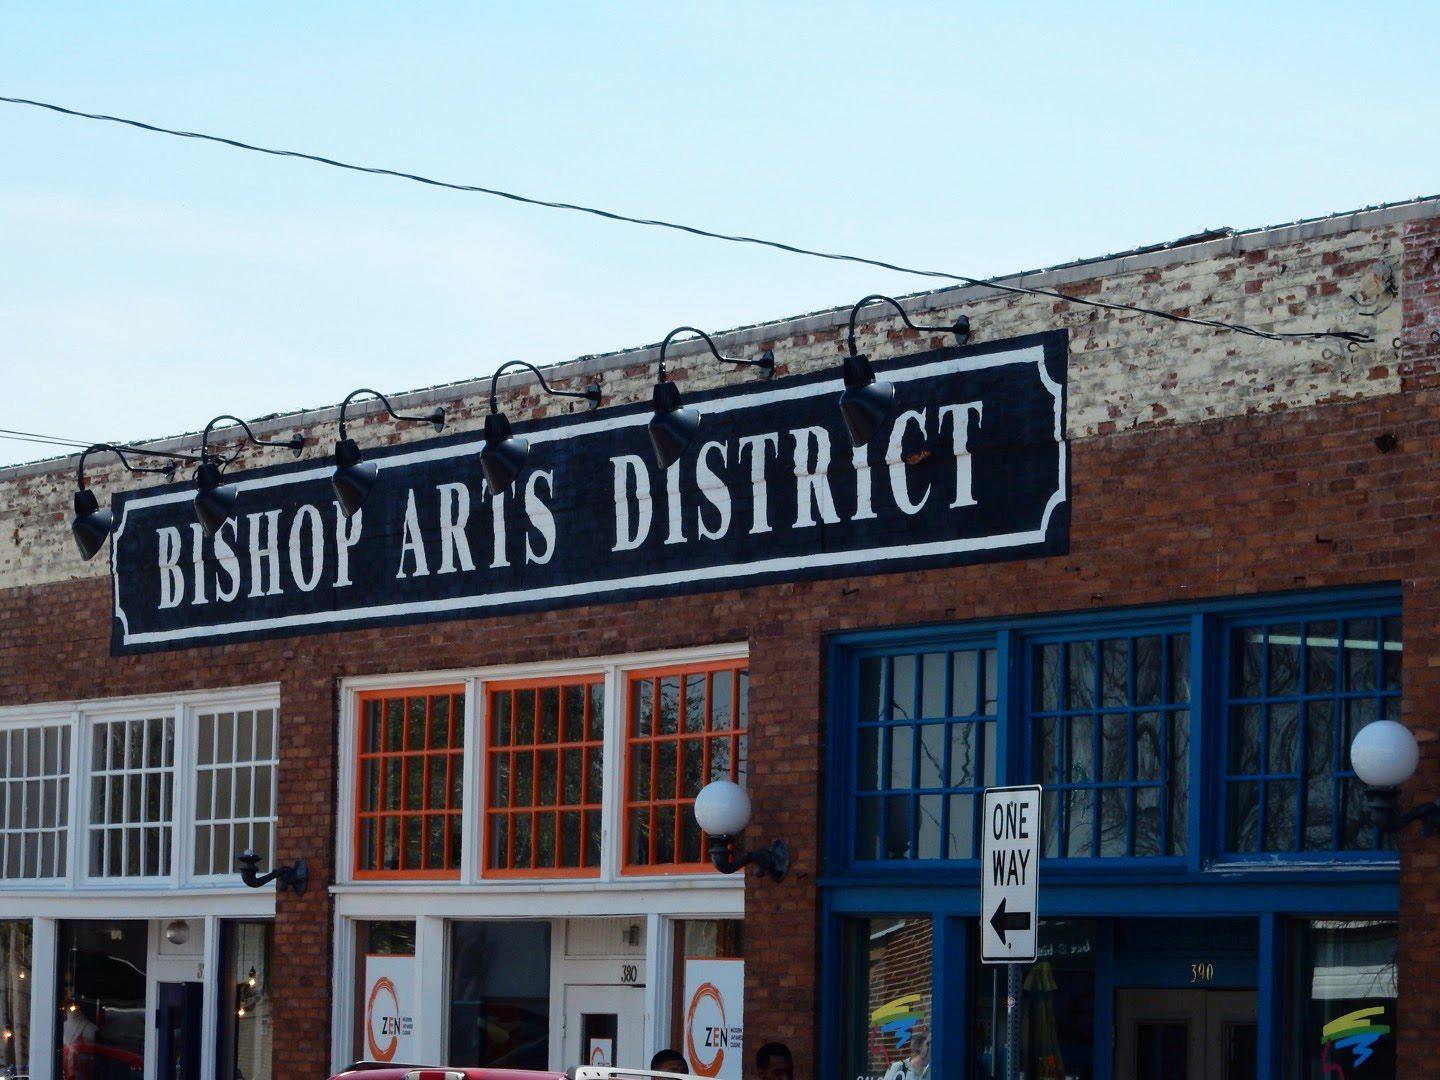 A vintage-looking building with a sign for "Bishop Arts District"